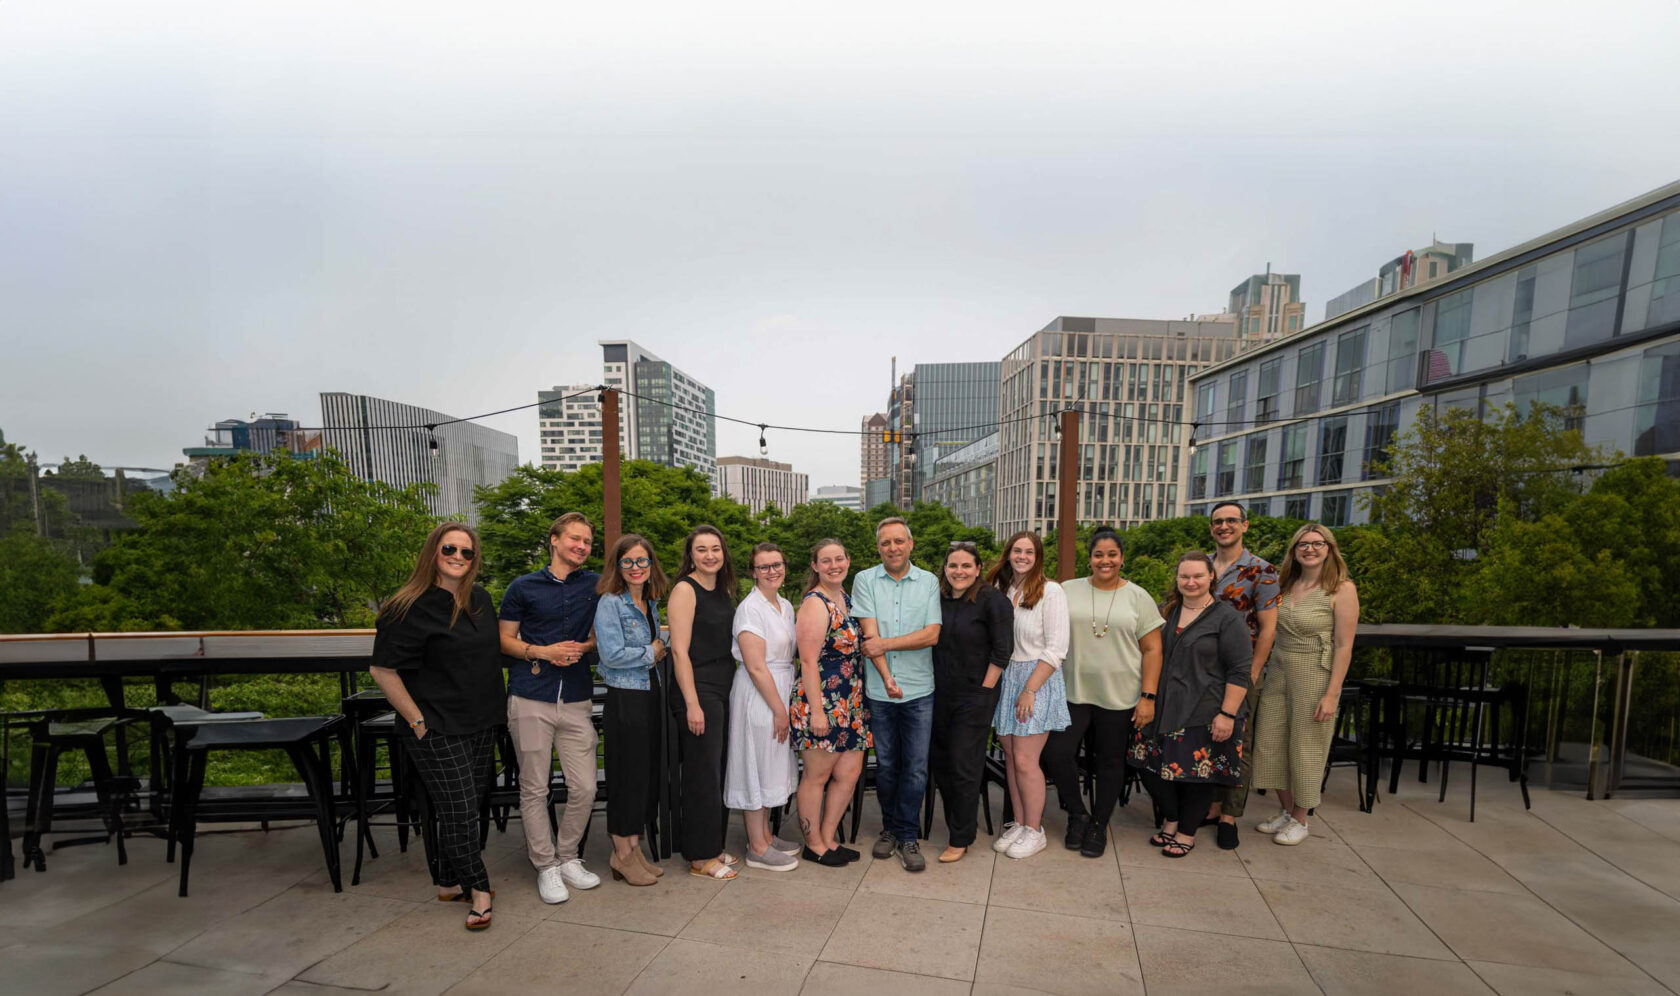 A group of people who work for Boston area food recovery organization Lovin Spoonfuls posing for a photo on a rooftop.